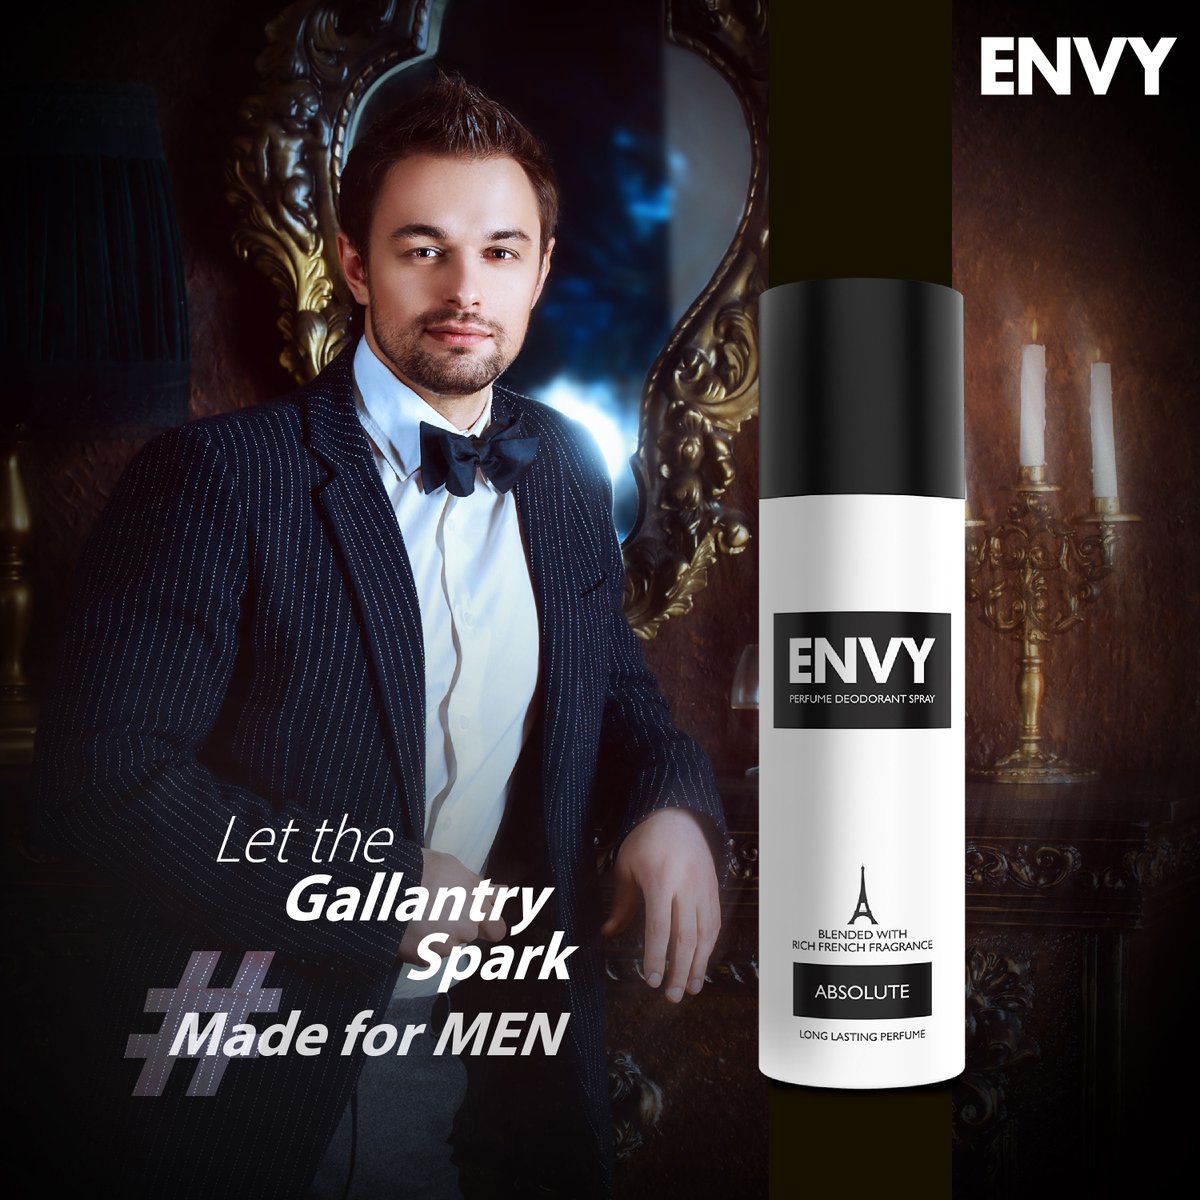 Just as a knight remains loyal to his cause, this fragrance remains unwavering on your skin. . . Get Your Envy: envyfragrances.com . . #madeformen #envyfrench #frenchperfume #perfumes #masculinefragrance #menstyling #fashion #menfragrance #menperfume #frenchcollection